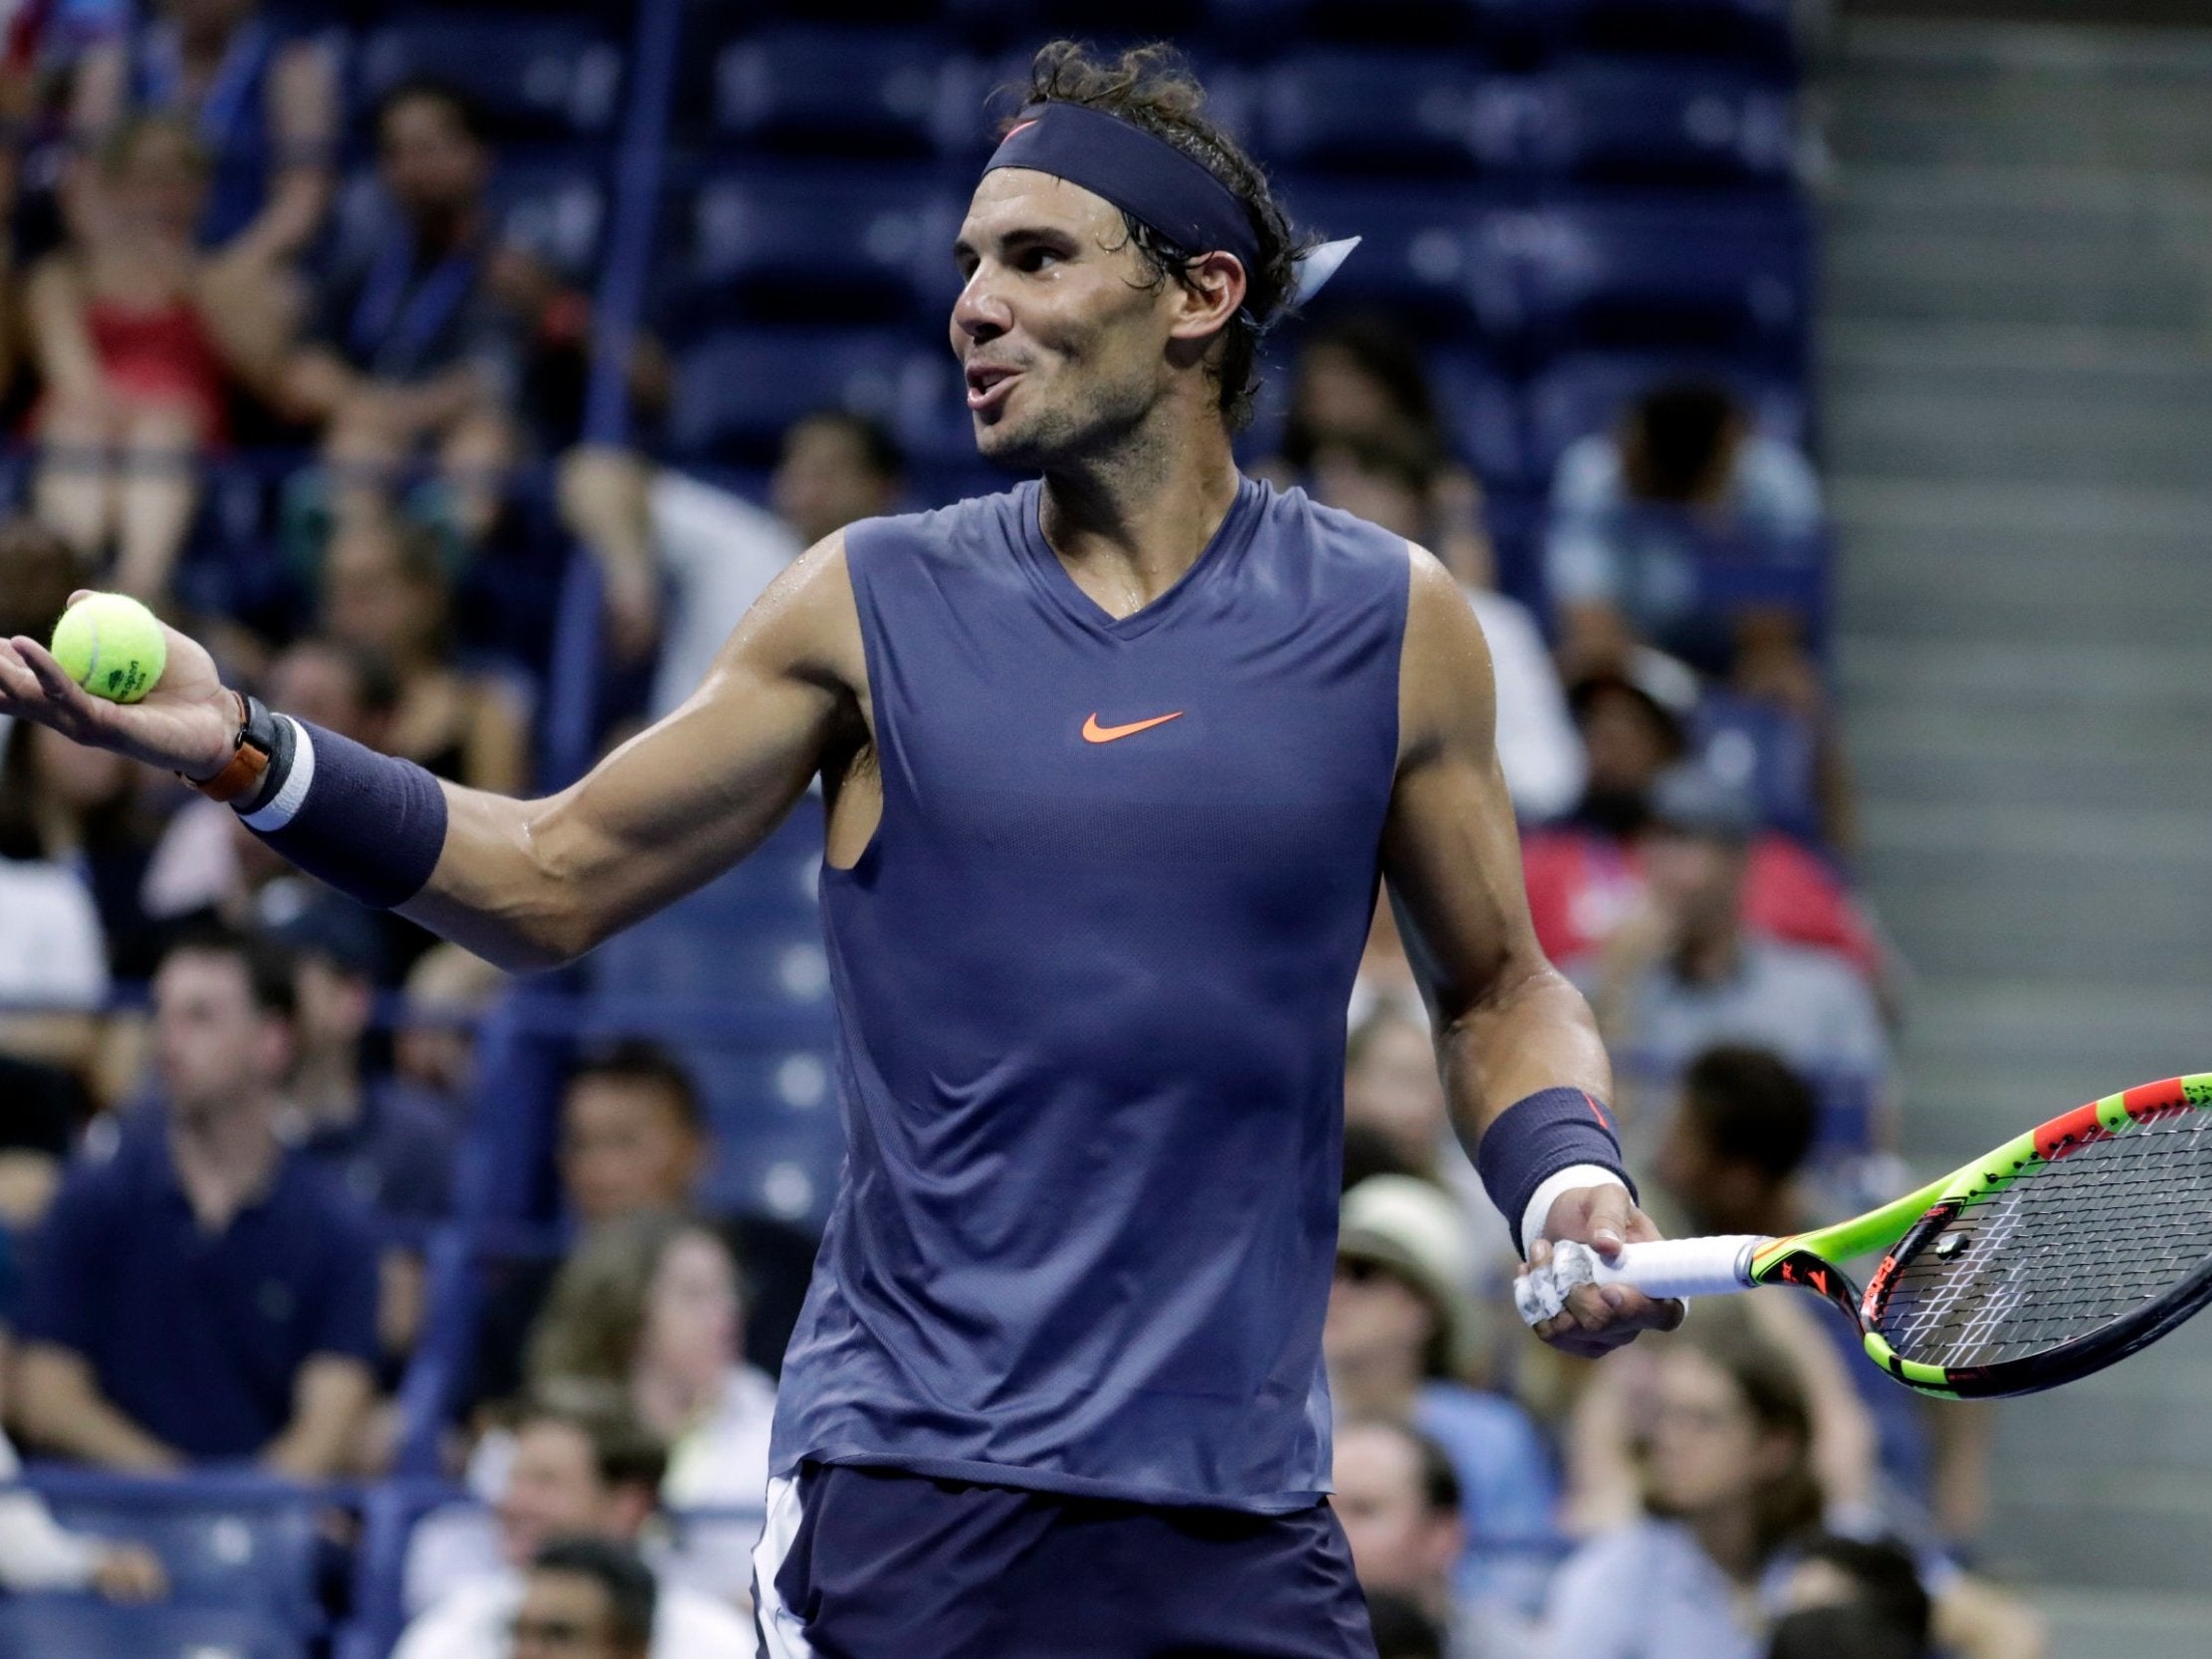 Rafael Nadal was unhappy with a warning for exceeding the shot clock